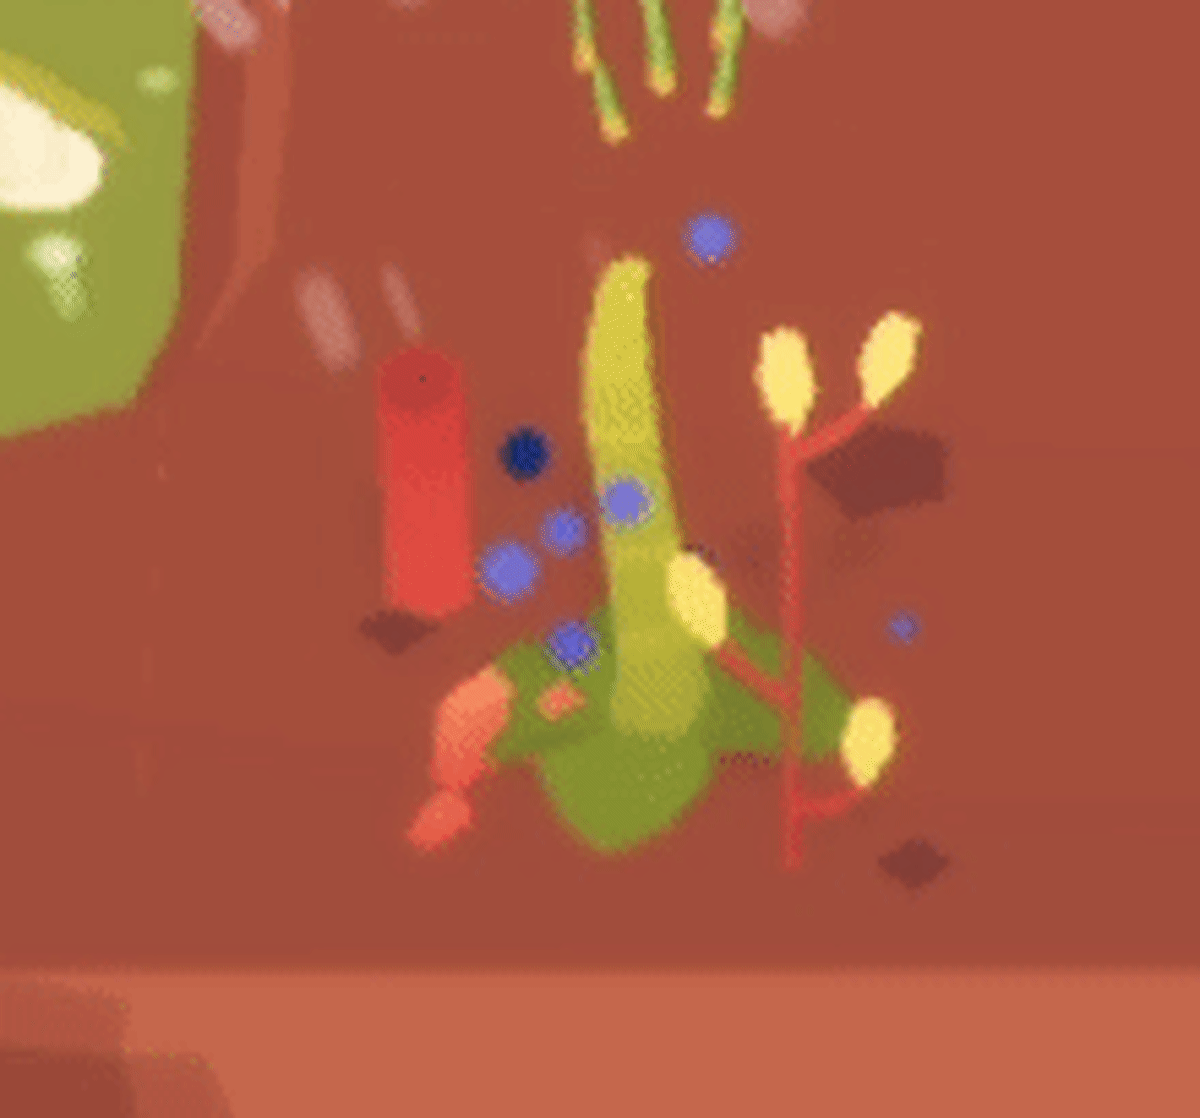 The easiest way to spot weeds is through the animated blue blobbies that float around the plant.